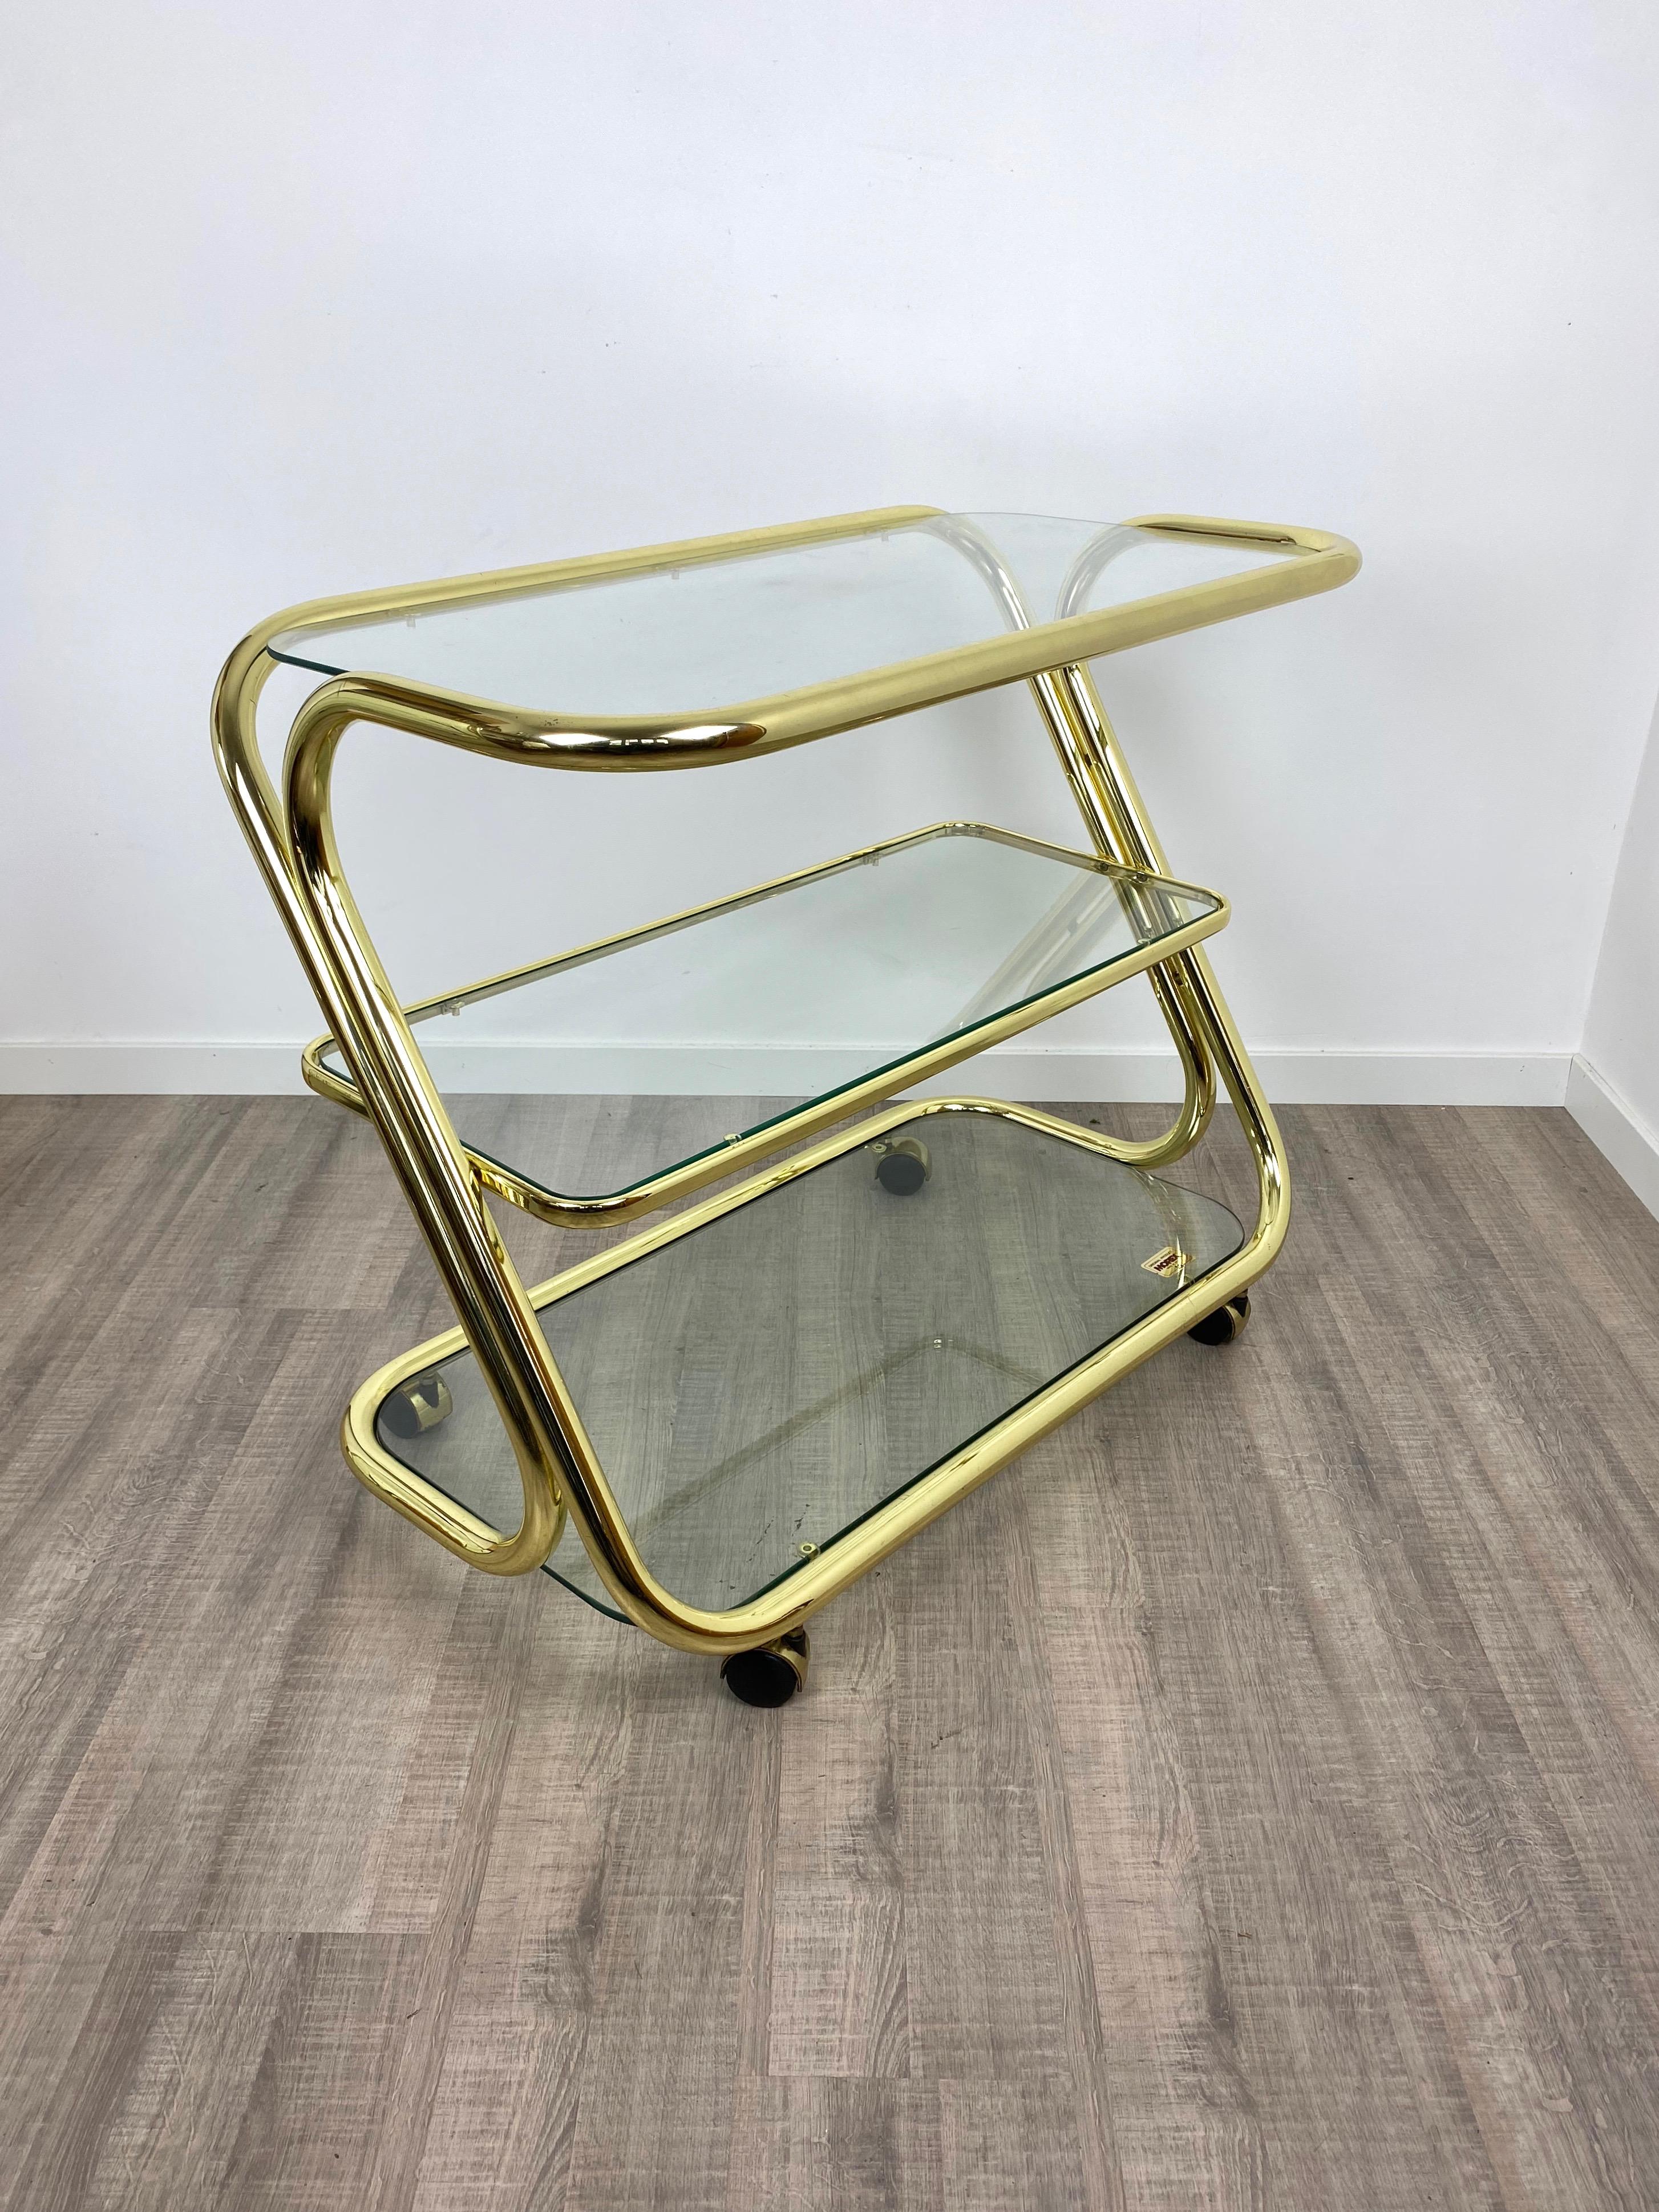 Serving cart trolley in a golden metal structure featuring three glass shelves. 
The item was made in Italy by Morex and has its original label still attached on the lowest shelf.